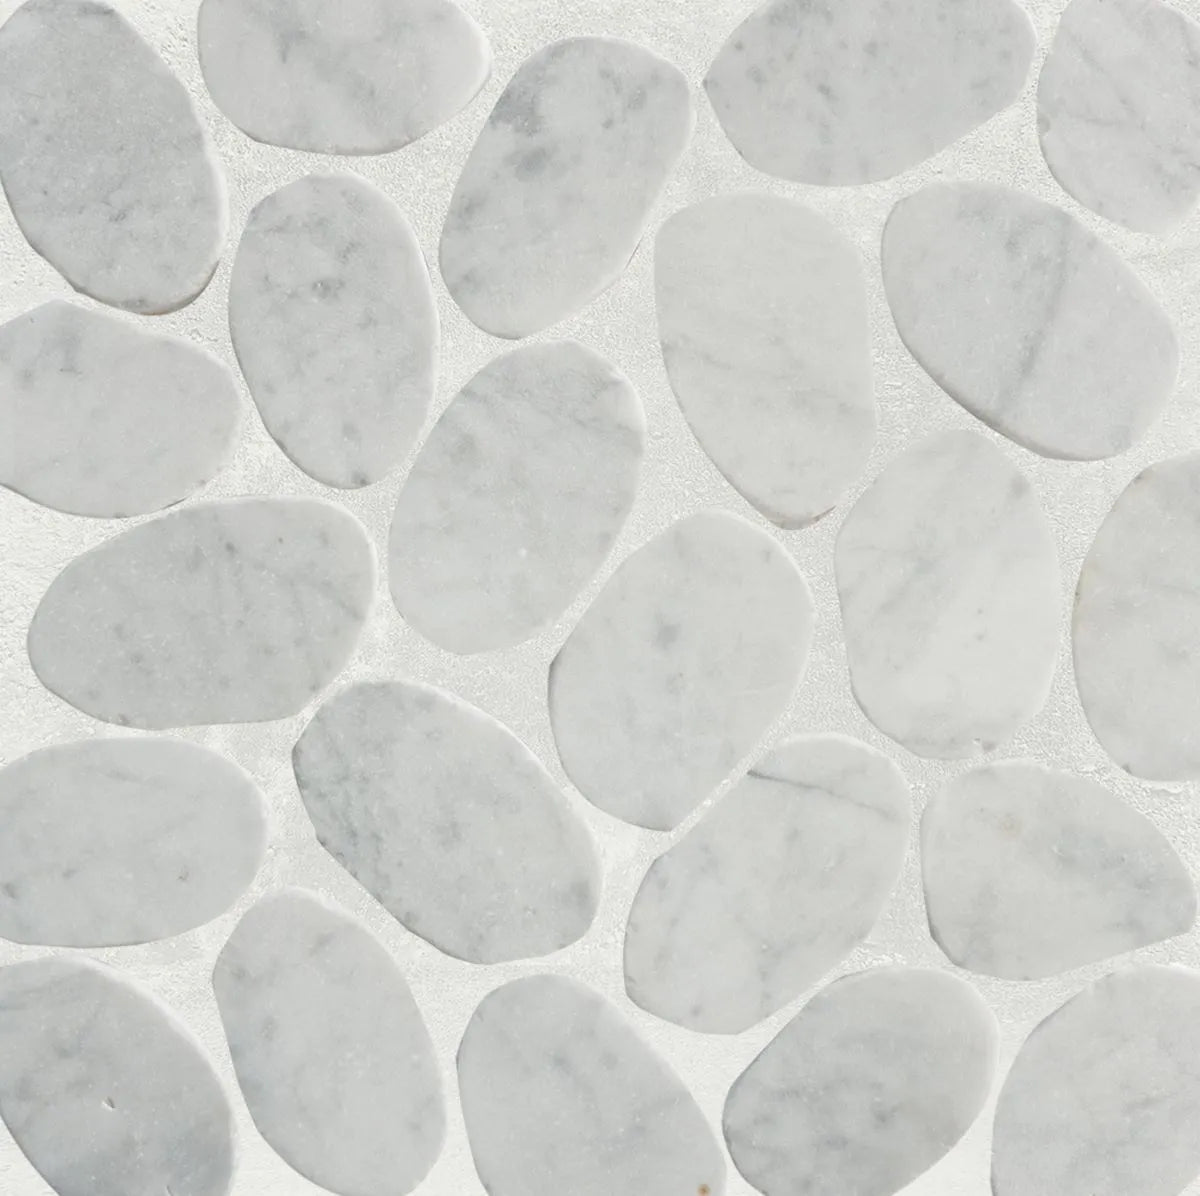 Slice carrara pebble tile sample close up with grout